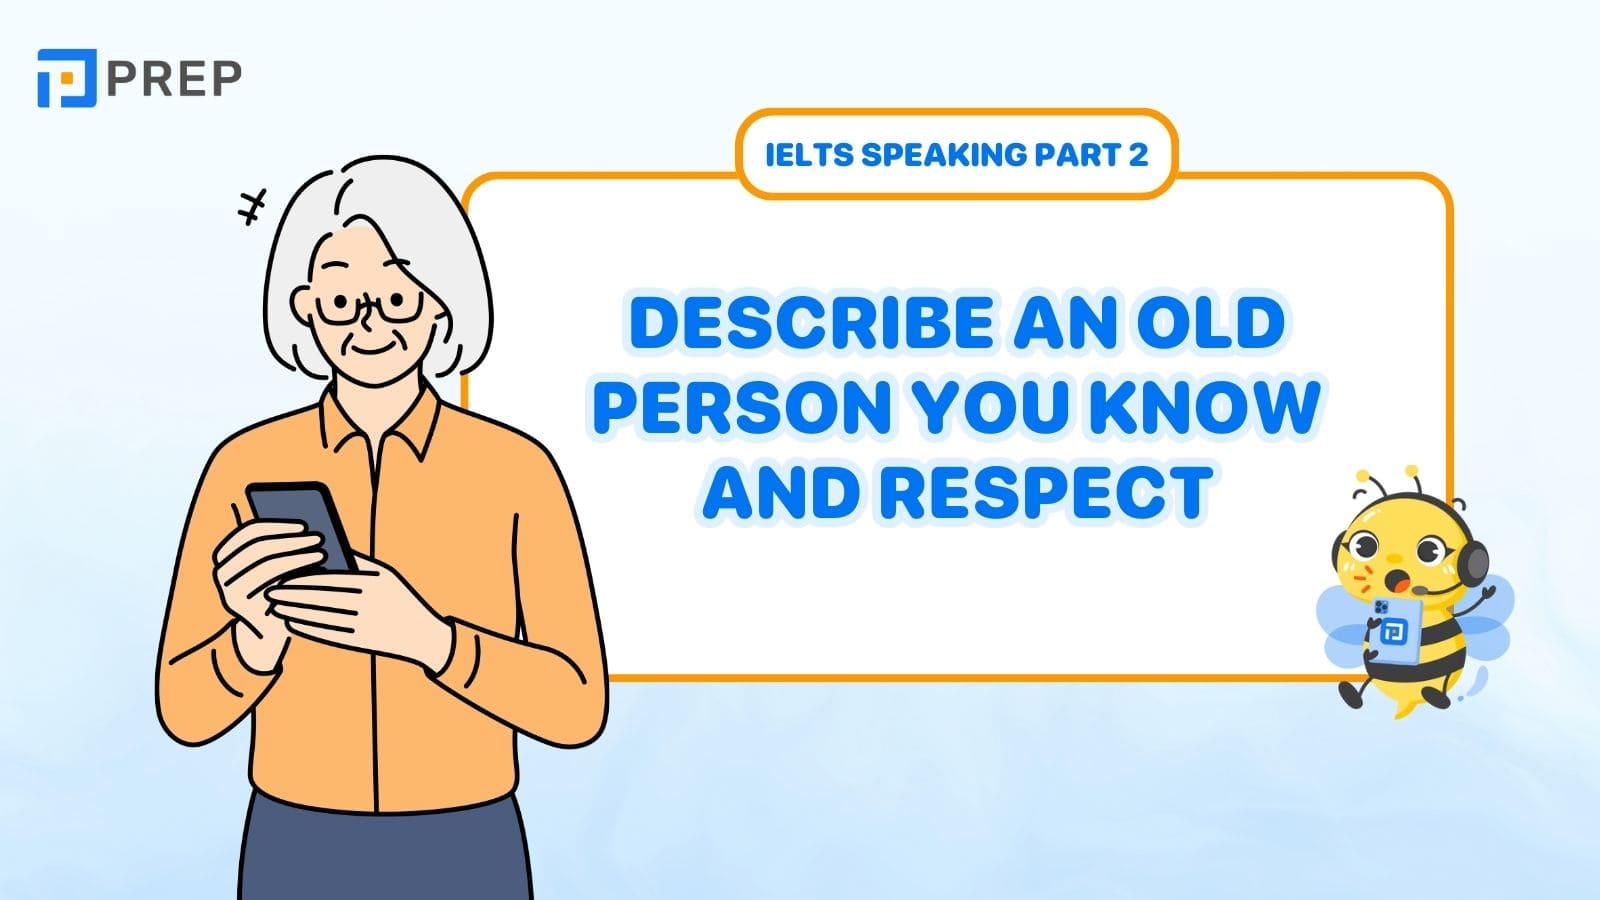 Describe an old person you know and respect